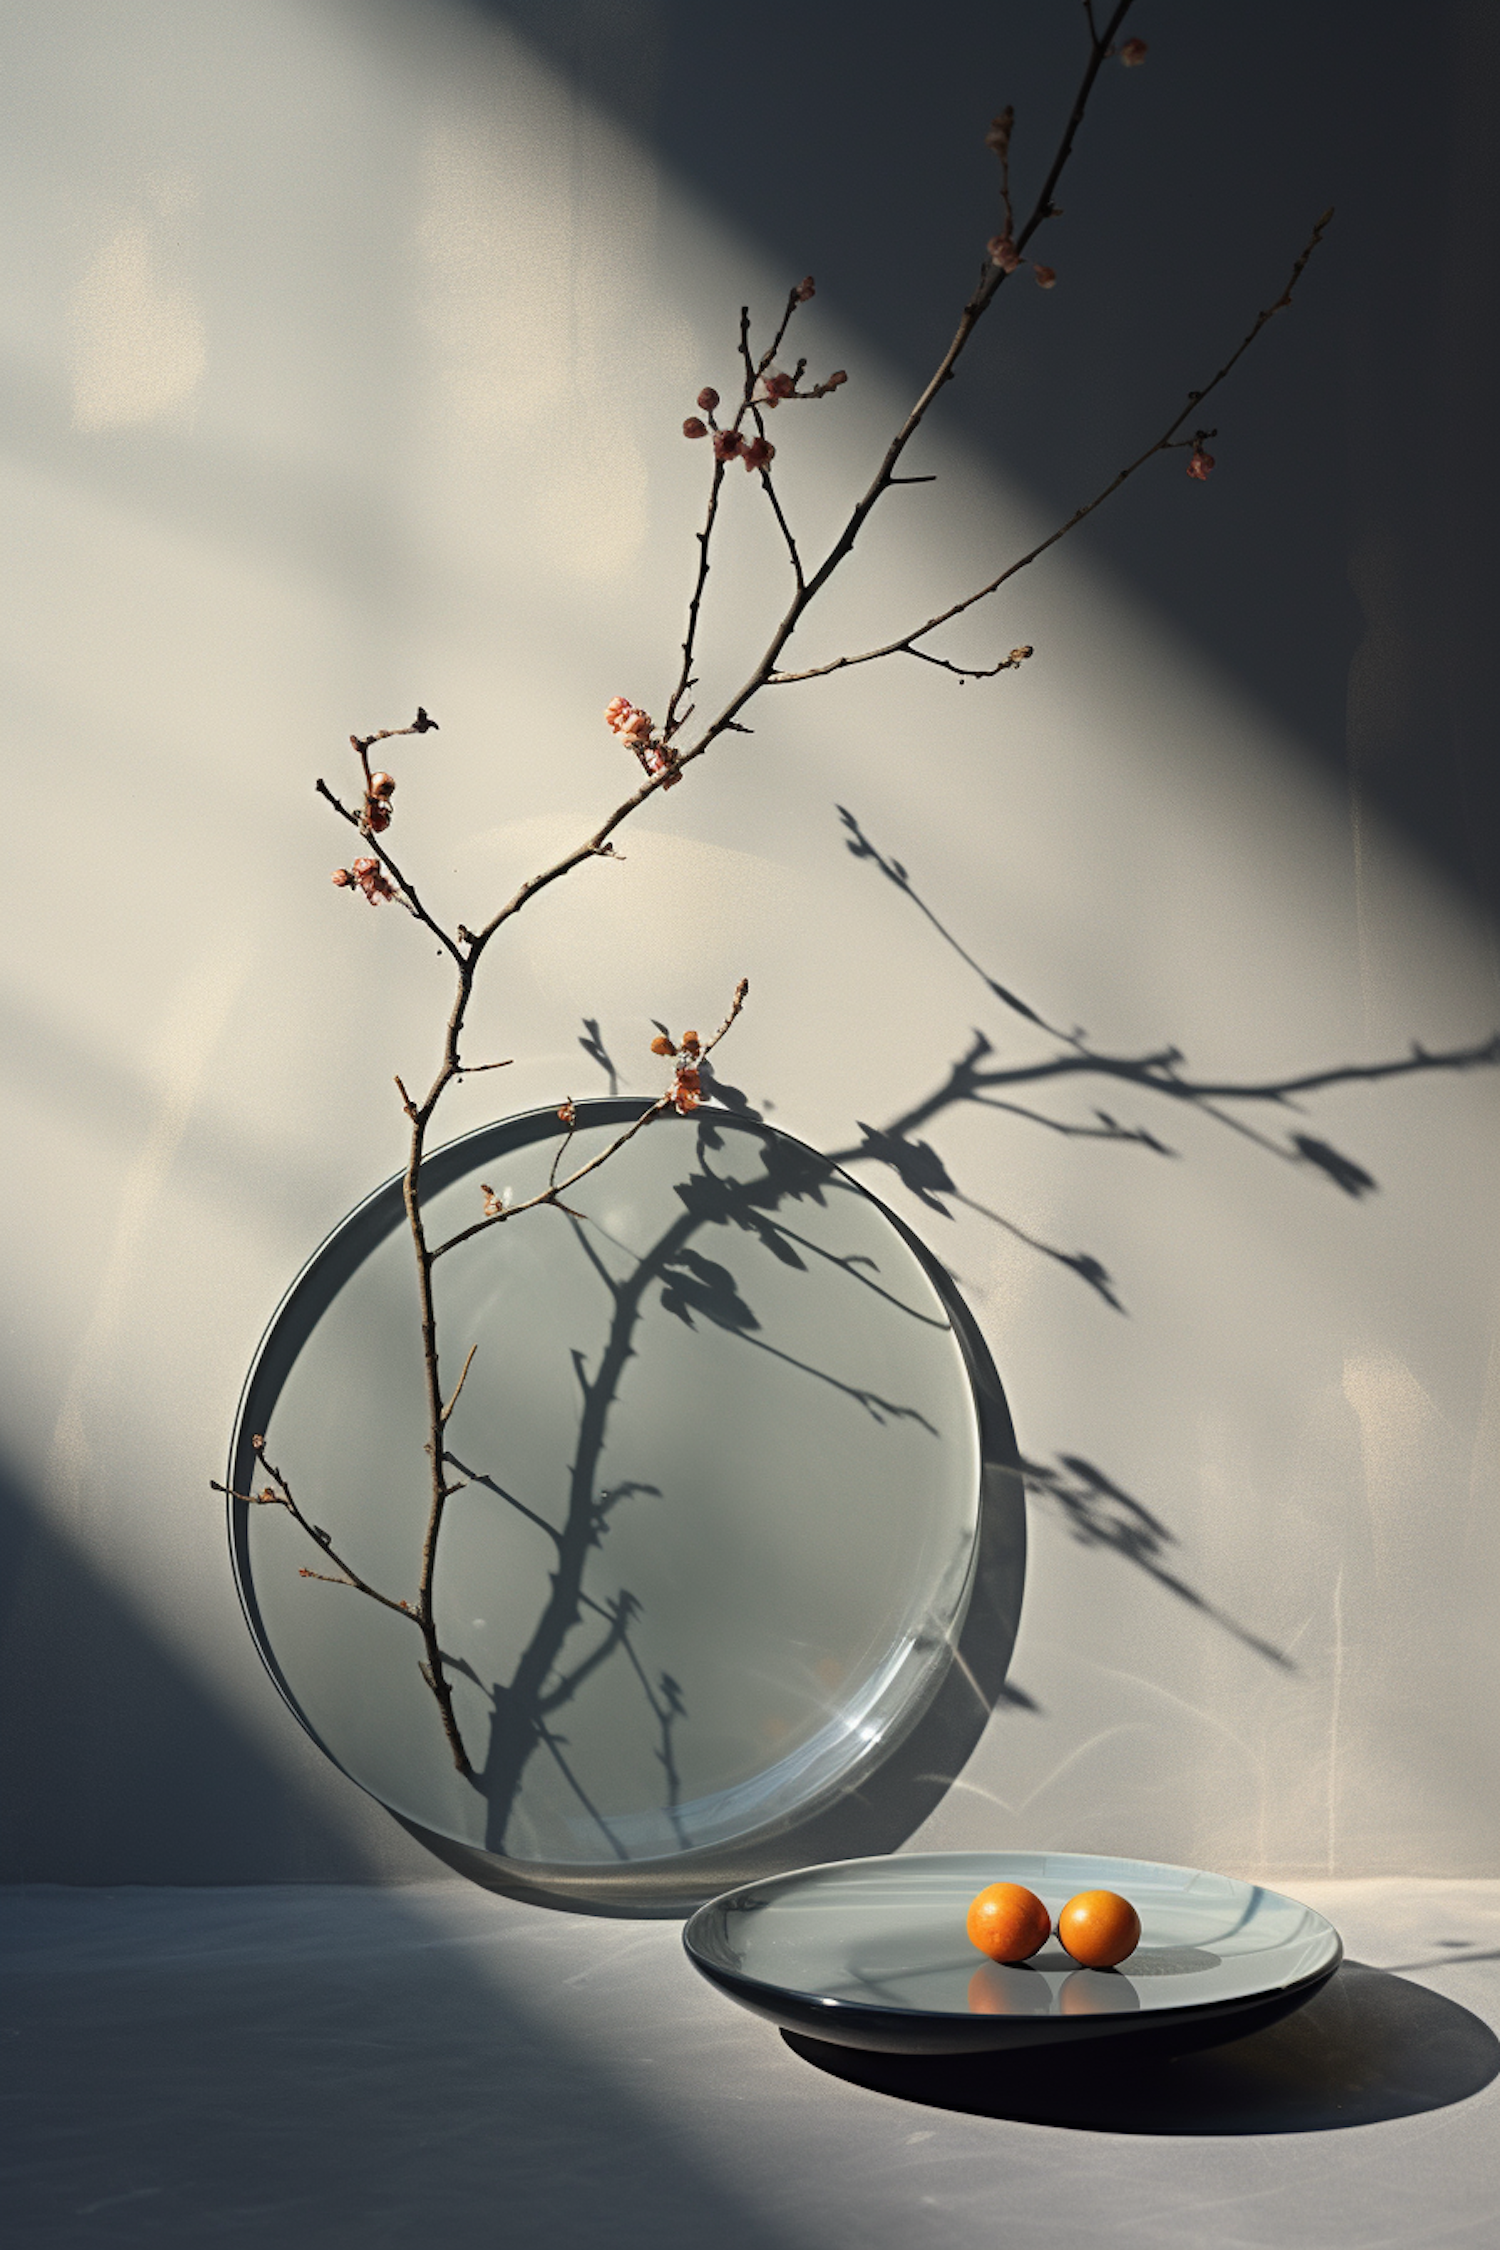 Elegance in Light and Shadow: A Still Life with Budding Branch and Sunlit Oranges